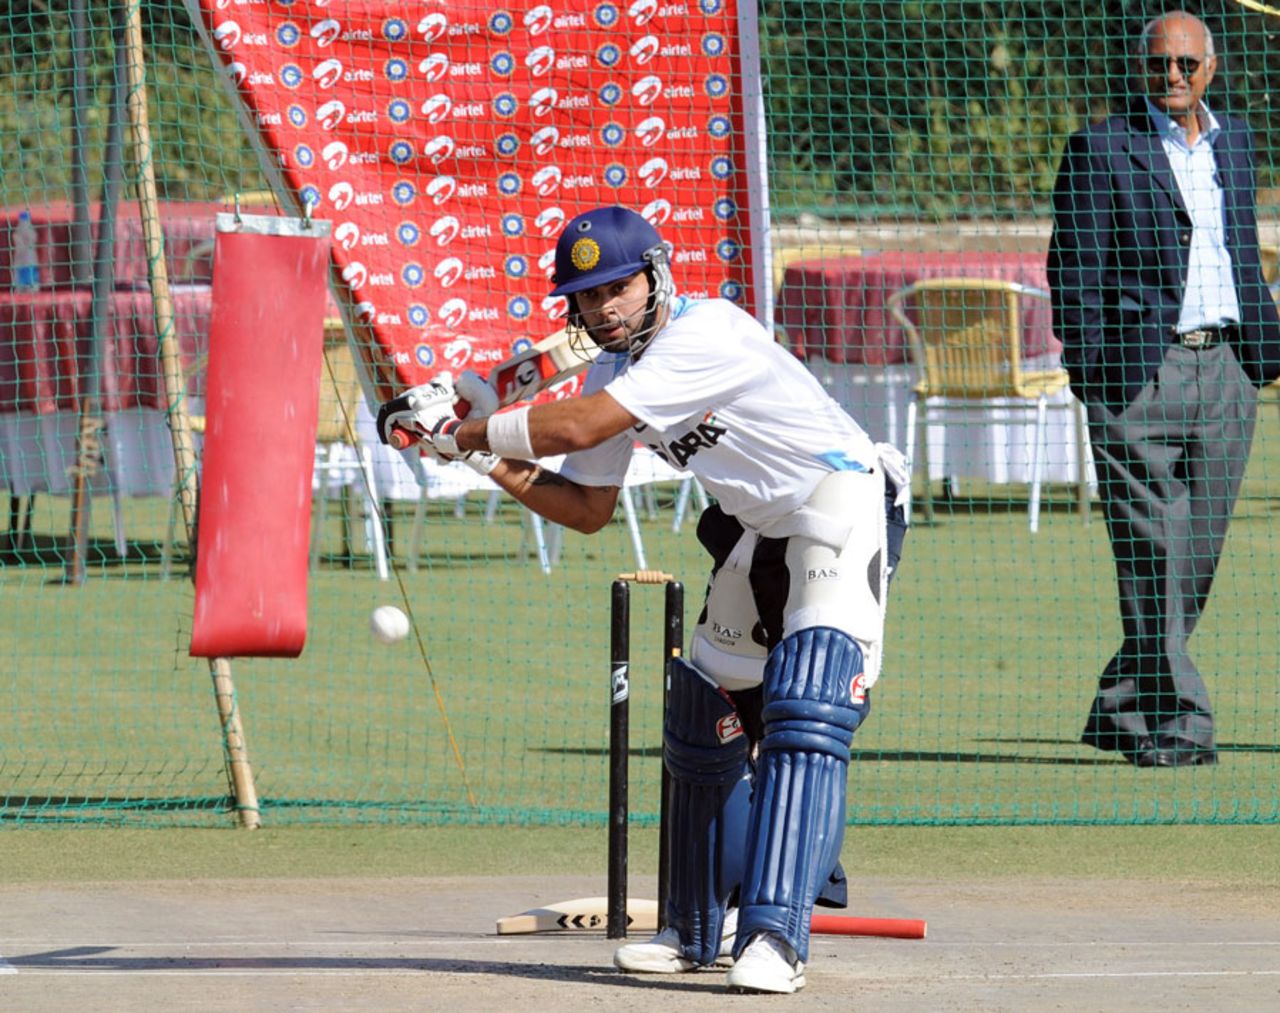 Virat Kohli, who made a hundred in the first ODI, practices in the nets ahead of the second one-dayer, Jaipur, November 30, 2010